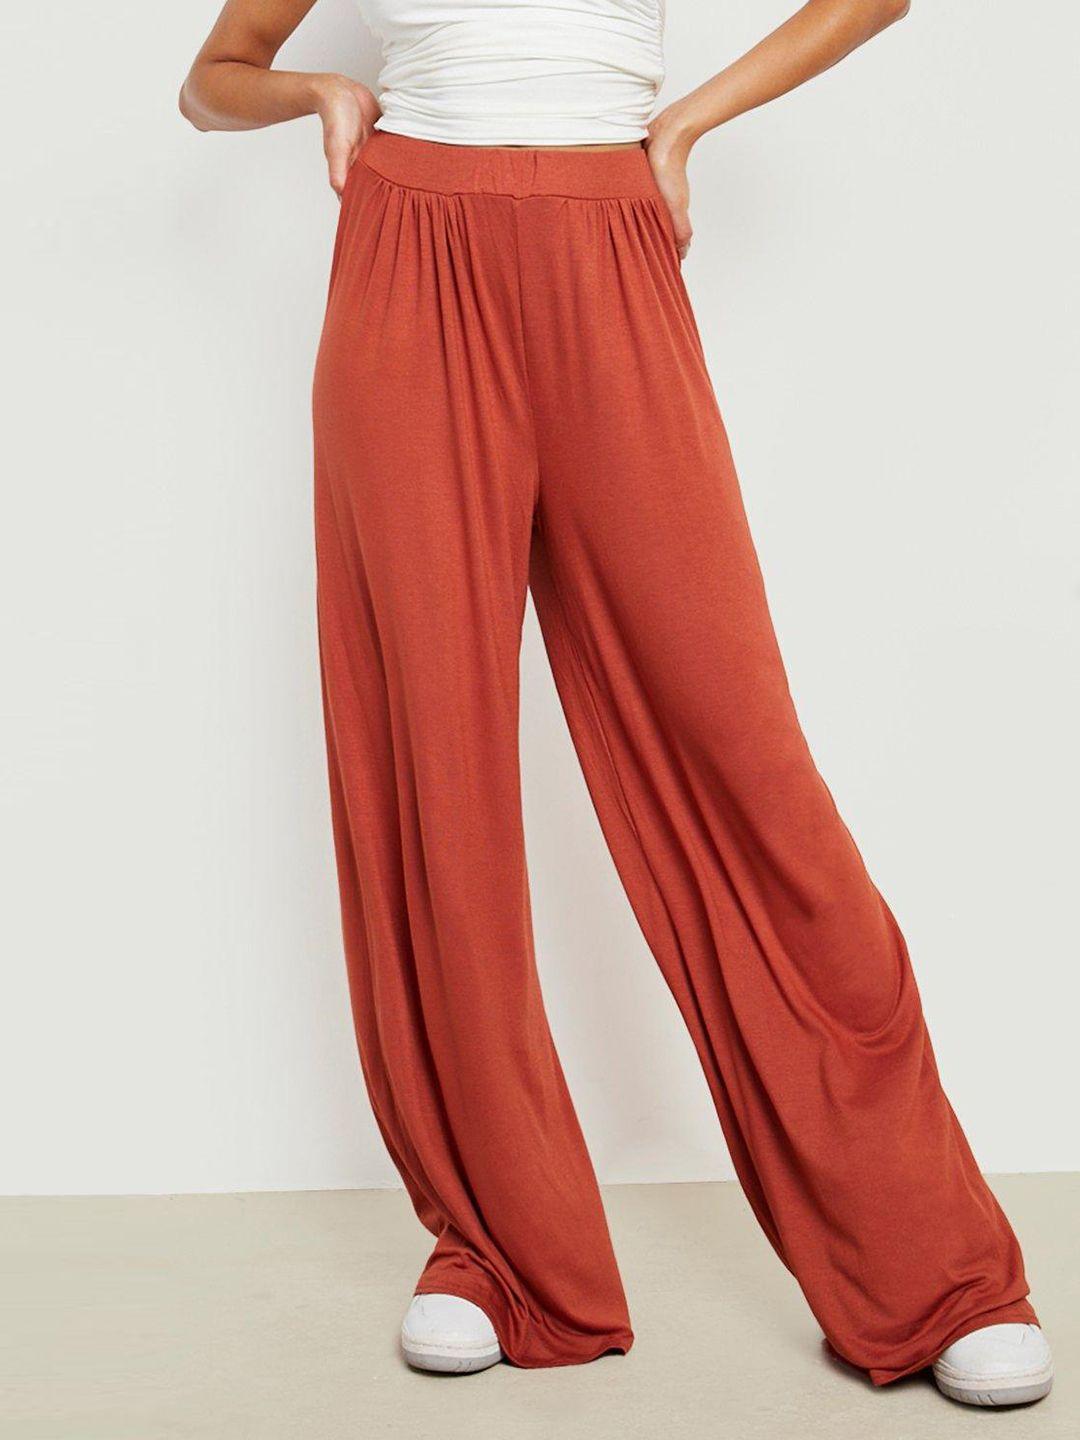 boohoo-women-high-rise-parallel-trousers